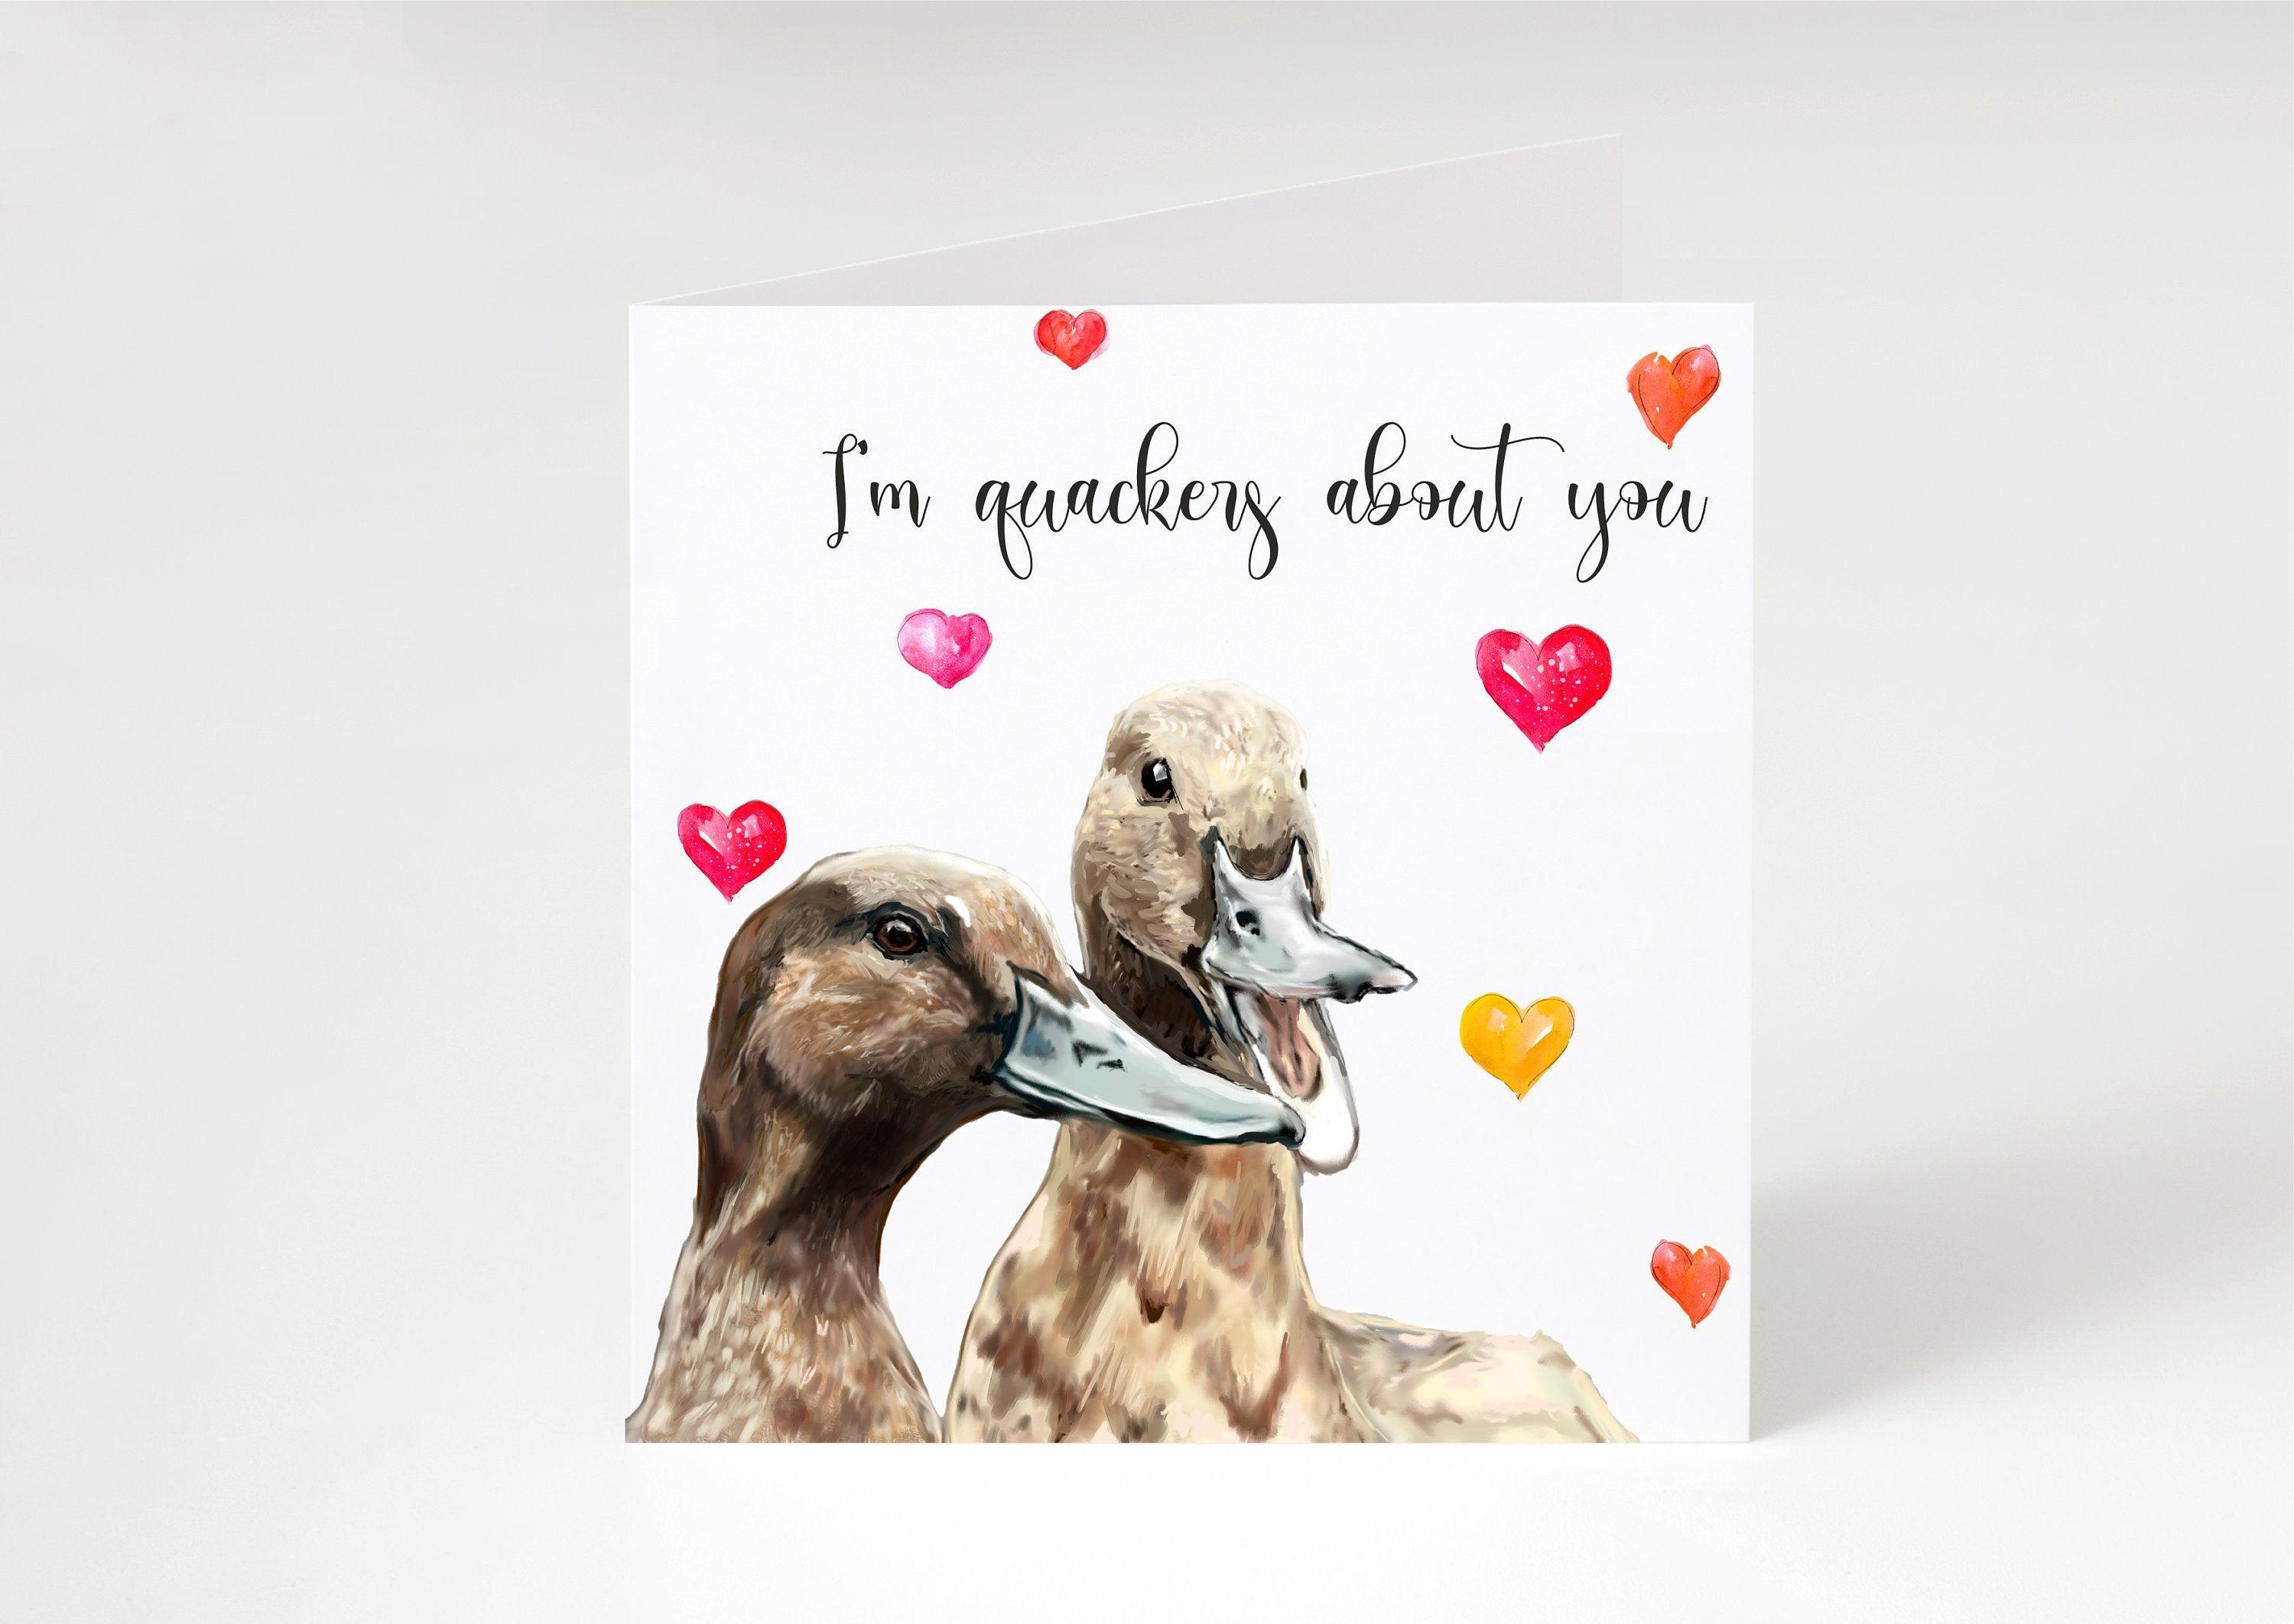 Im Quackers about you- Duck Valentine's card for him,her,themlove,Valentine's day,Feb 14th,open,friend,best friend,wife,husband,fiancee, dog